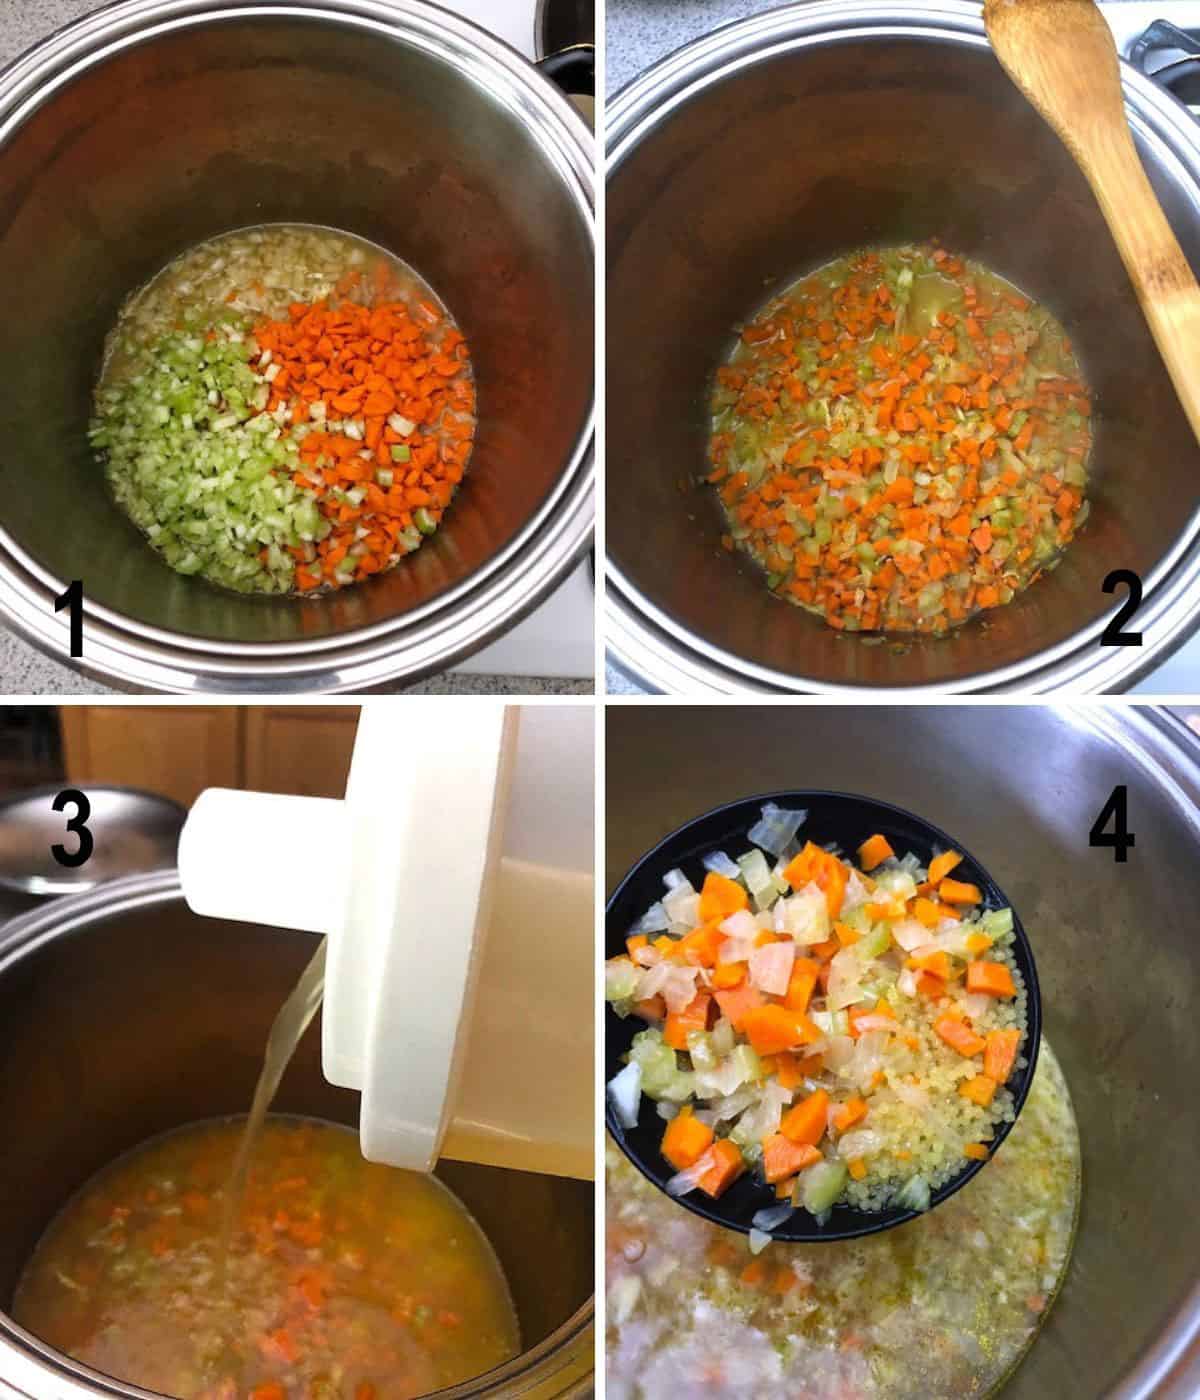 diced onions, celery, carrots in pot, pouring stock, scoop of vegetables and uncooked pastina